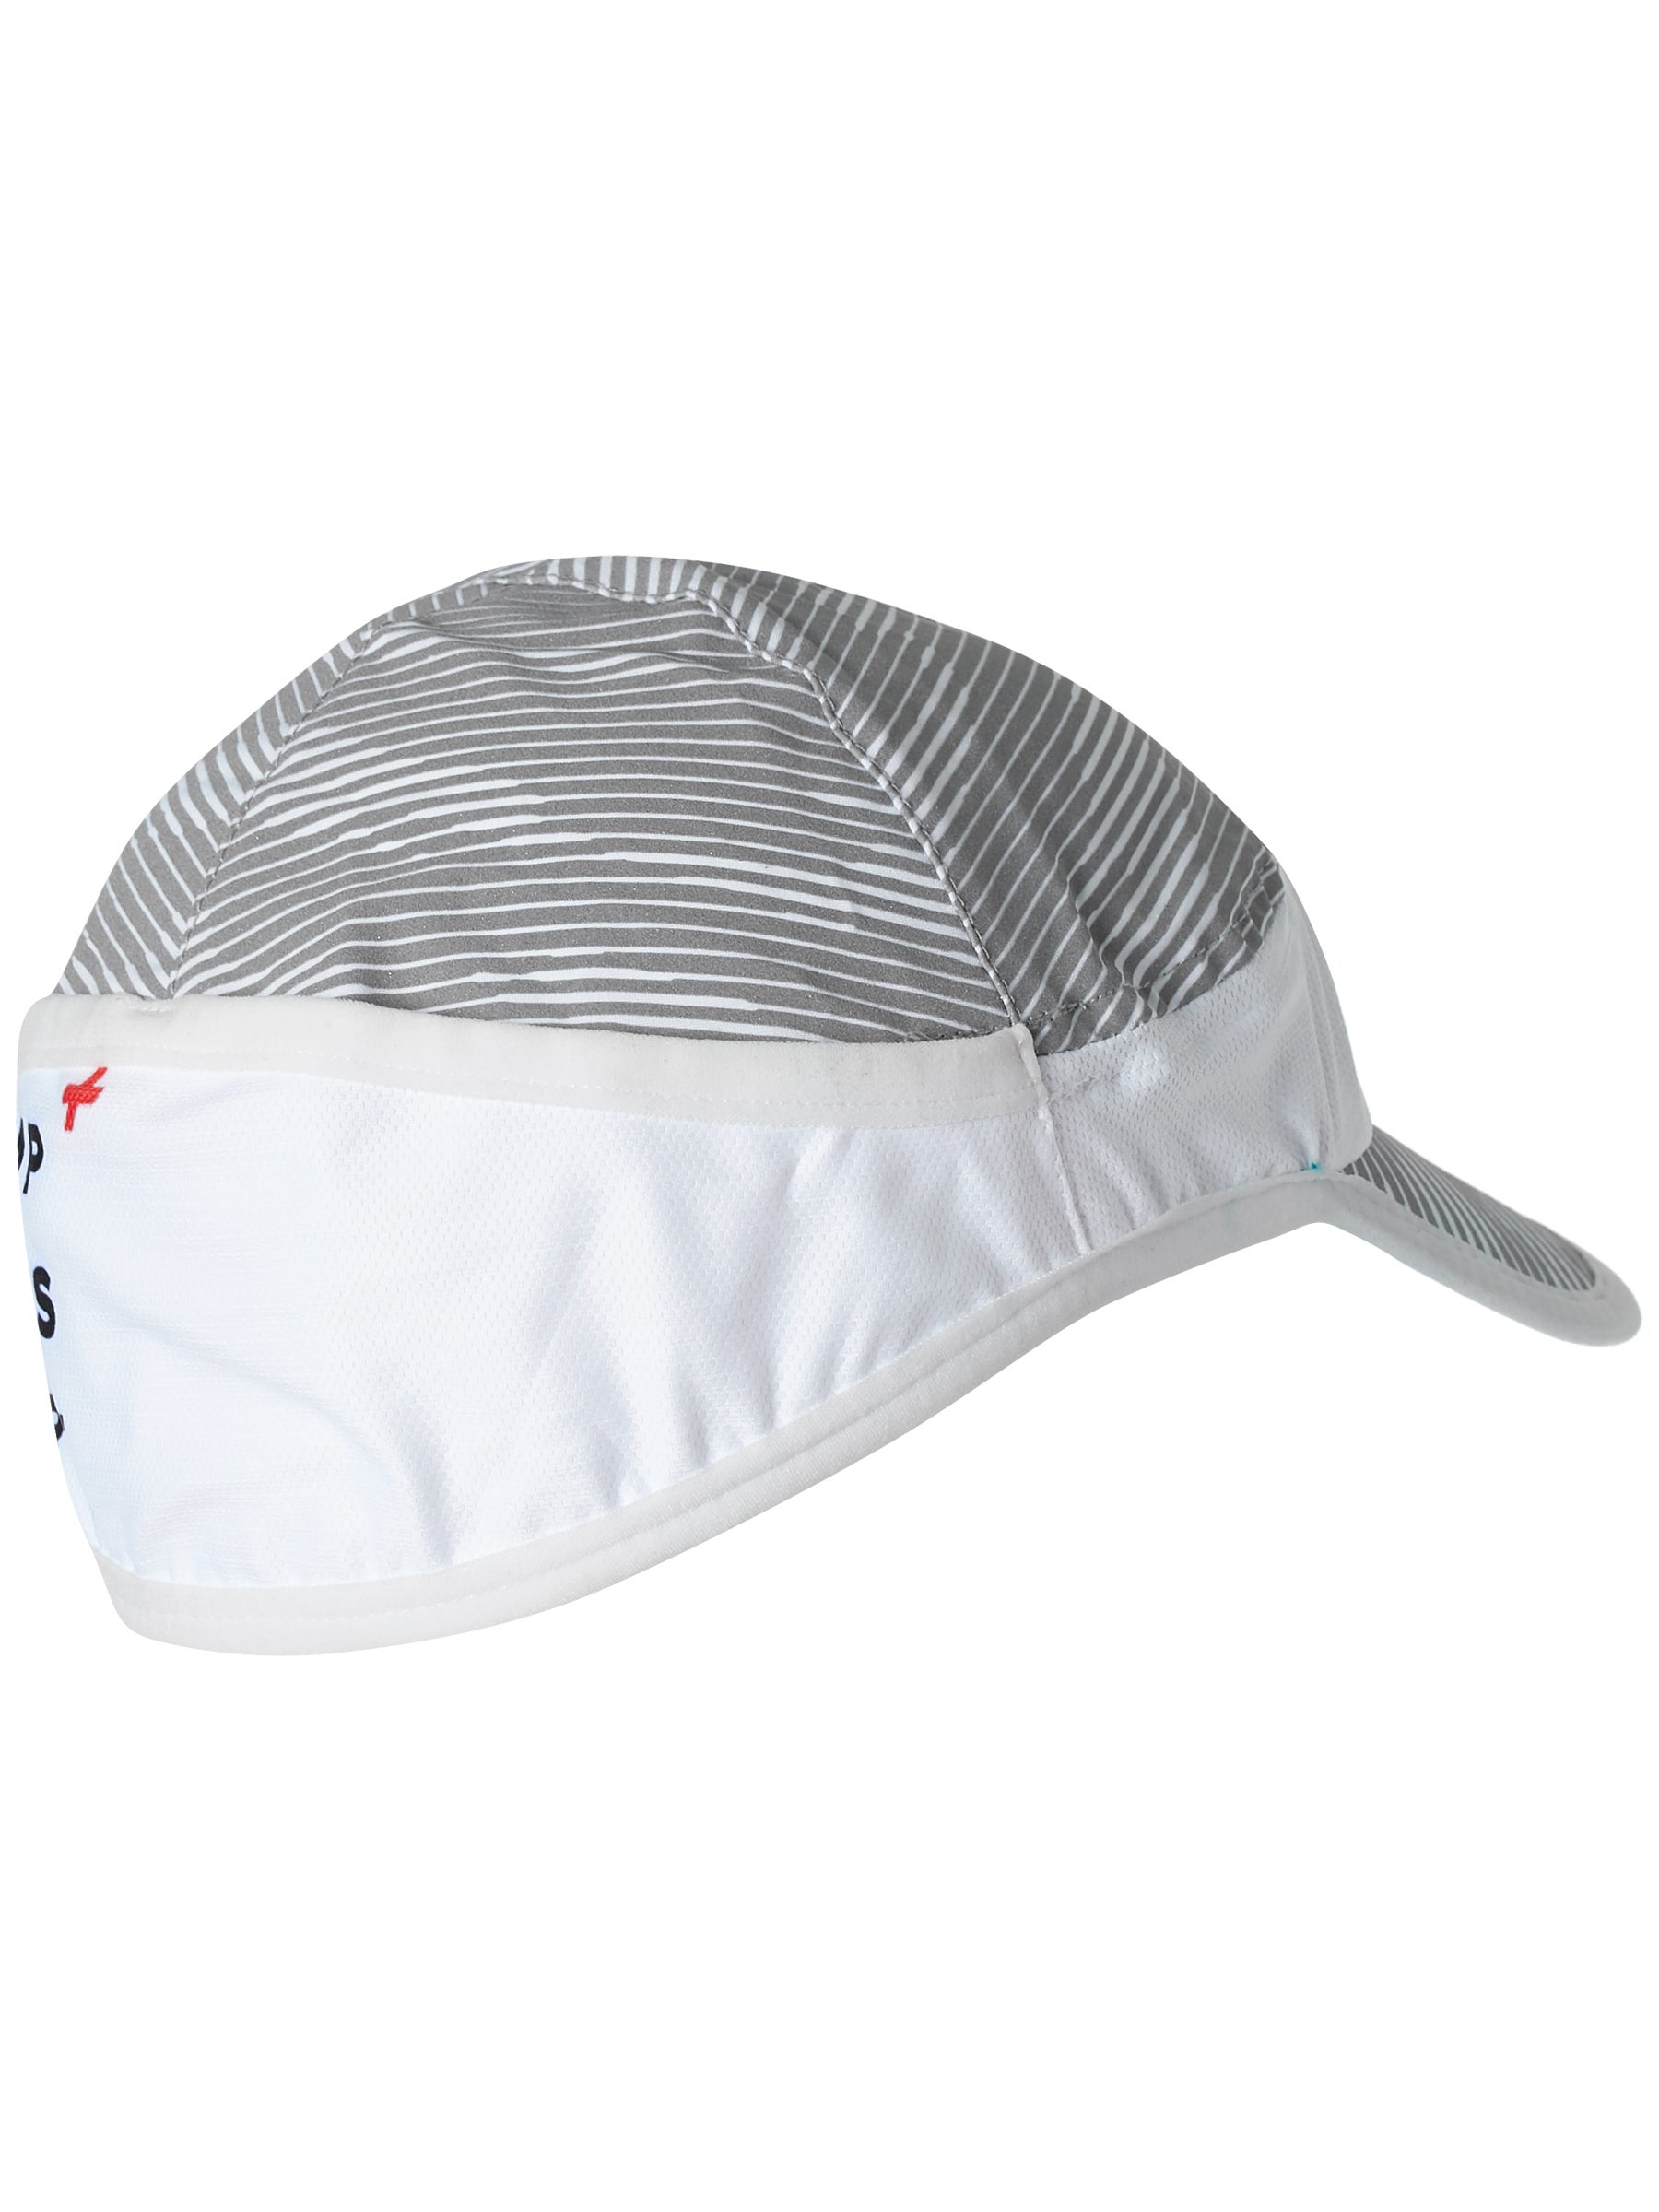 White Sports Running Breathable Reflective Compressport Unisex Ice Cap 